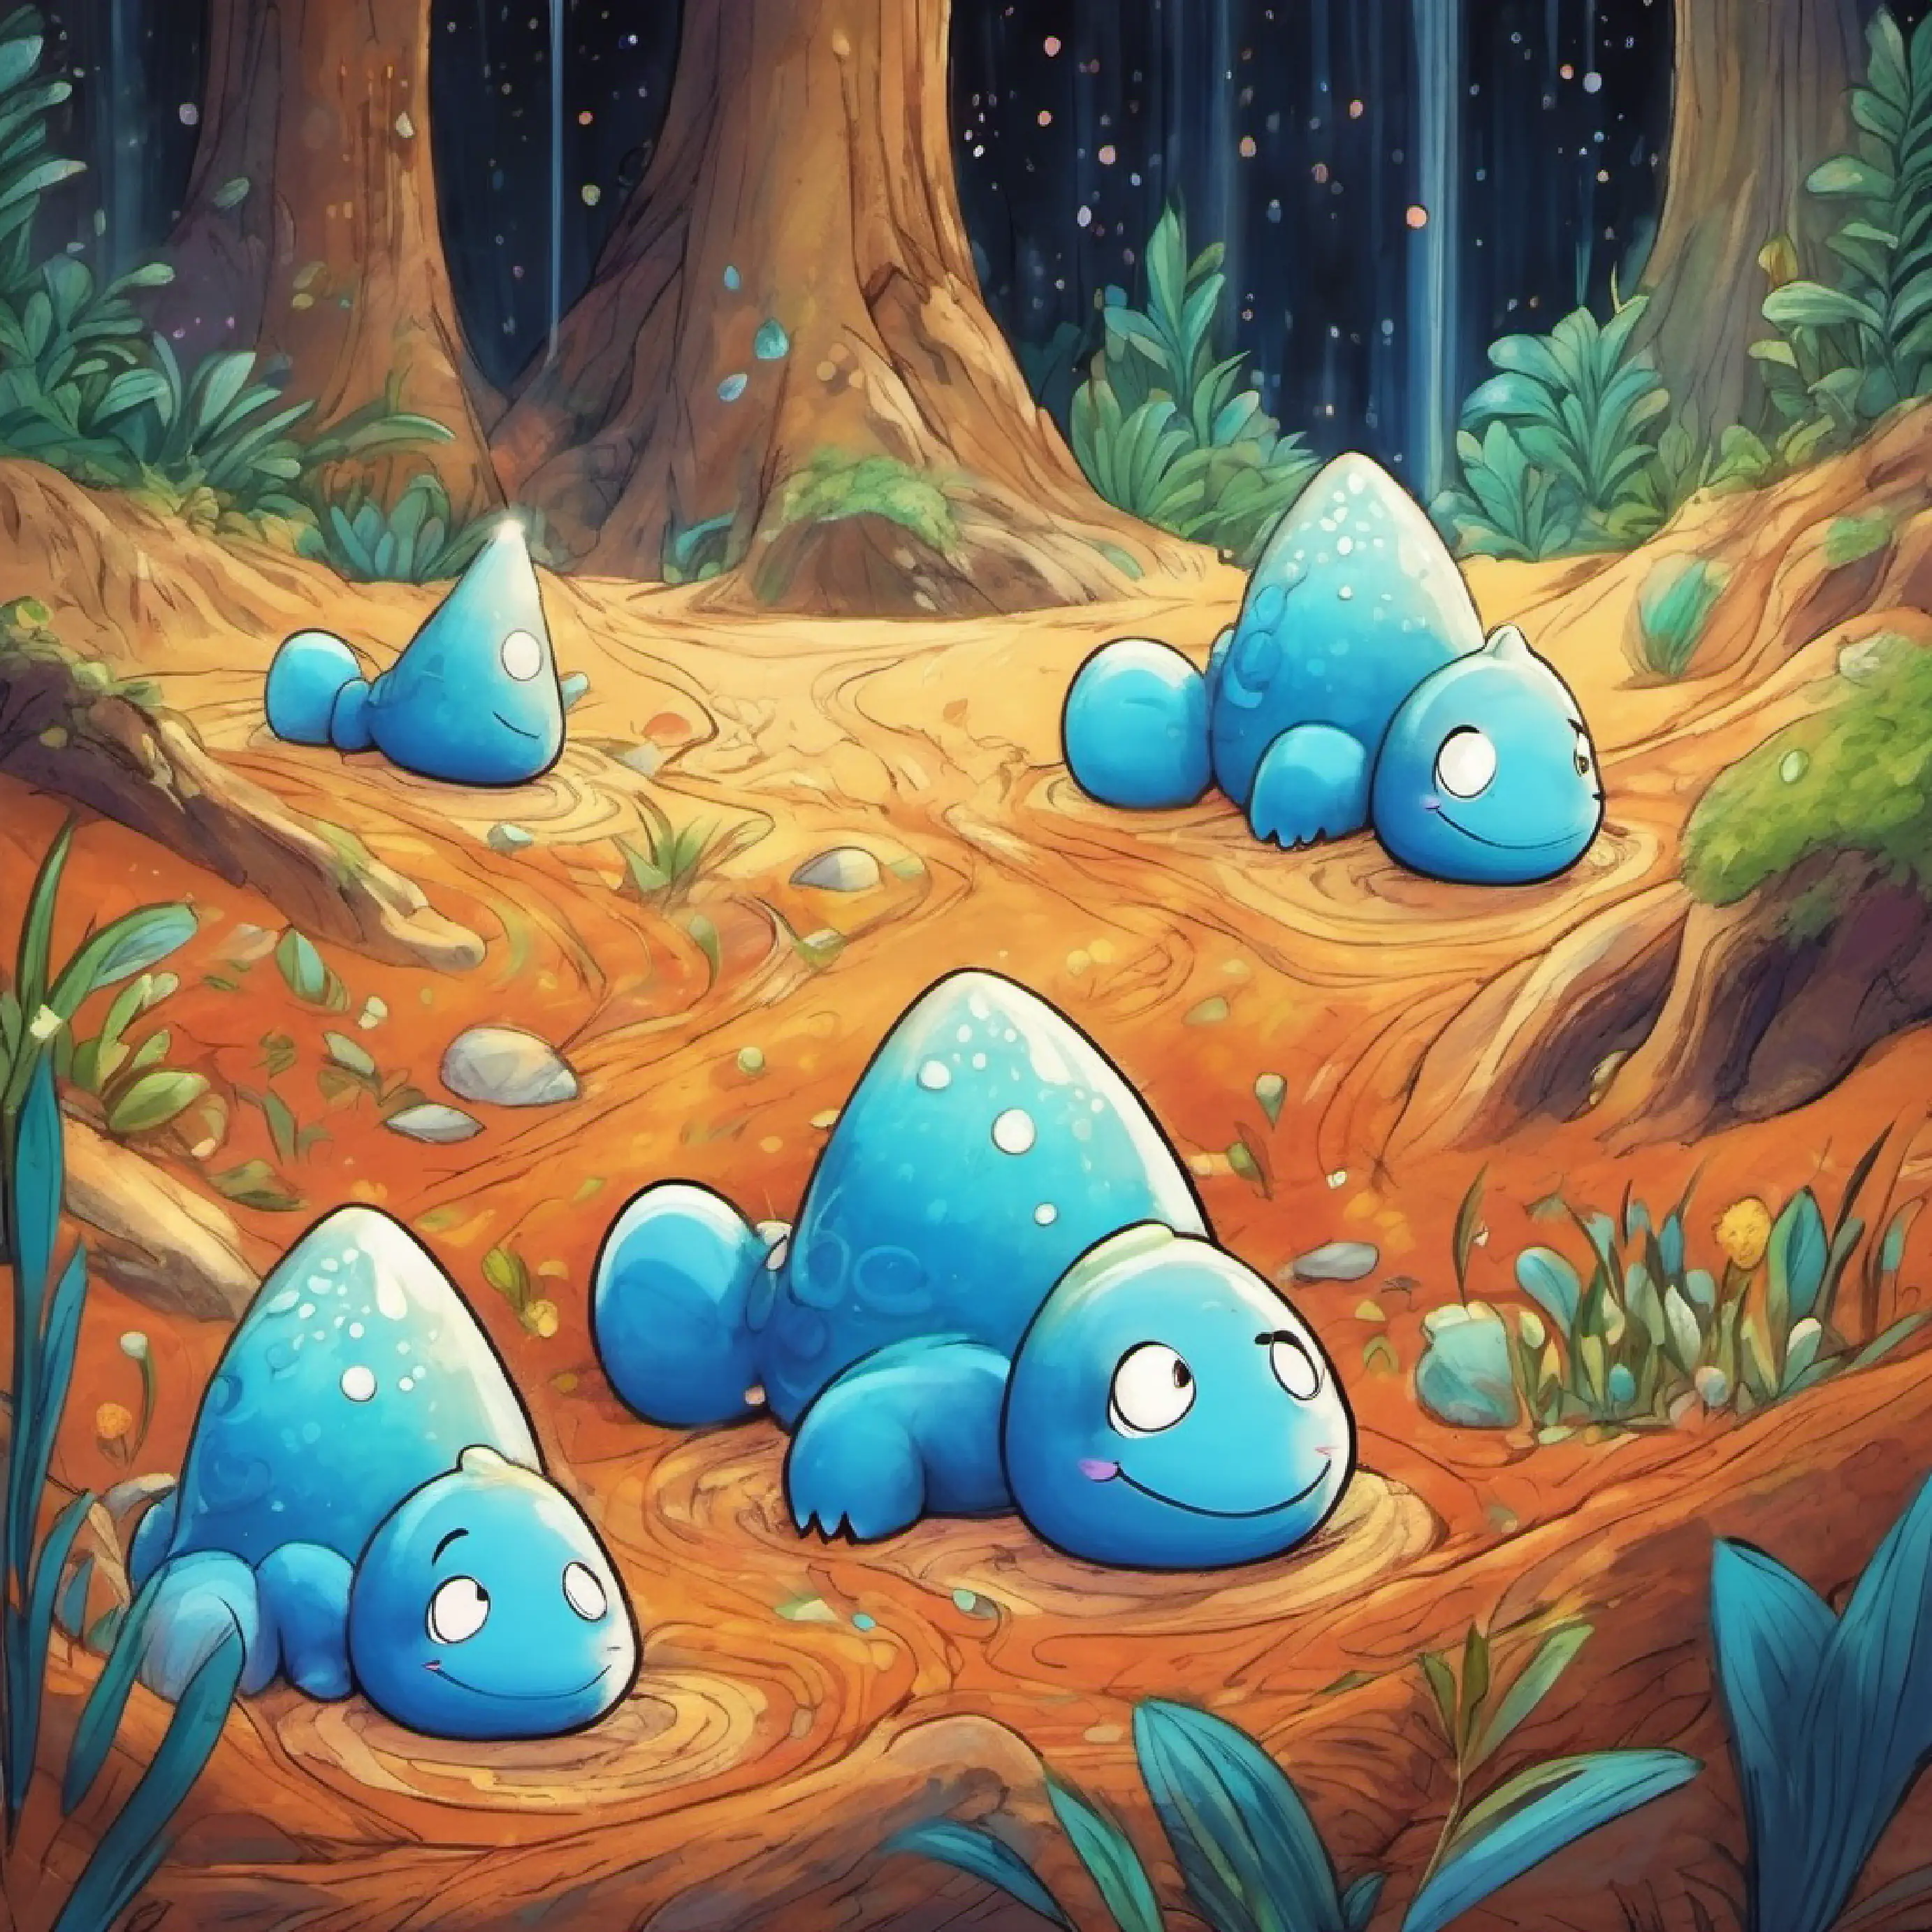 The friends play and a droplet with sparkling blue eyes, cheerful and energetic falls asleep in the soil.